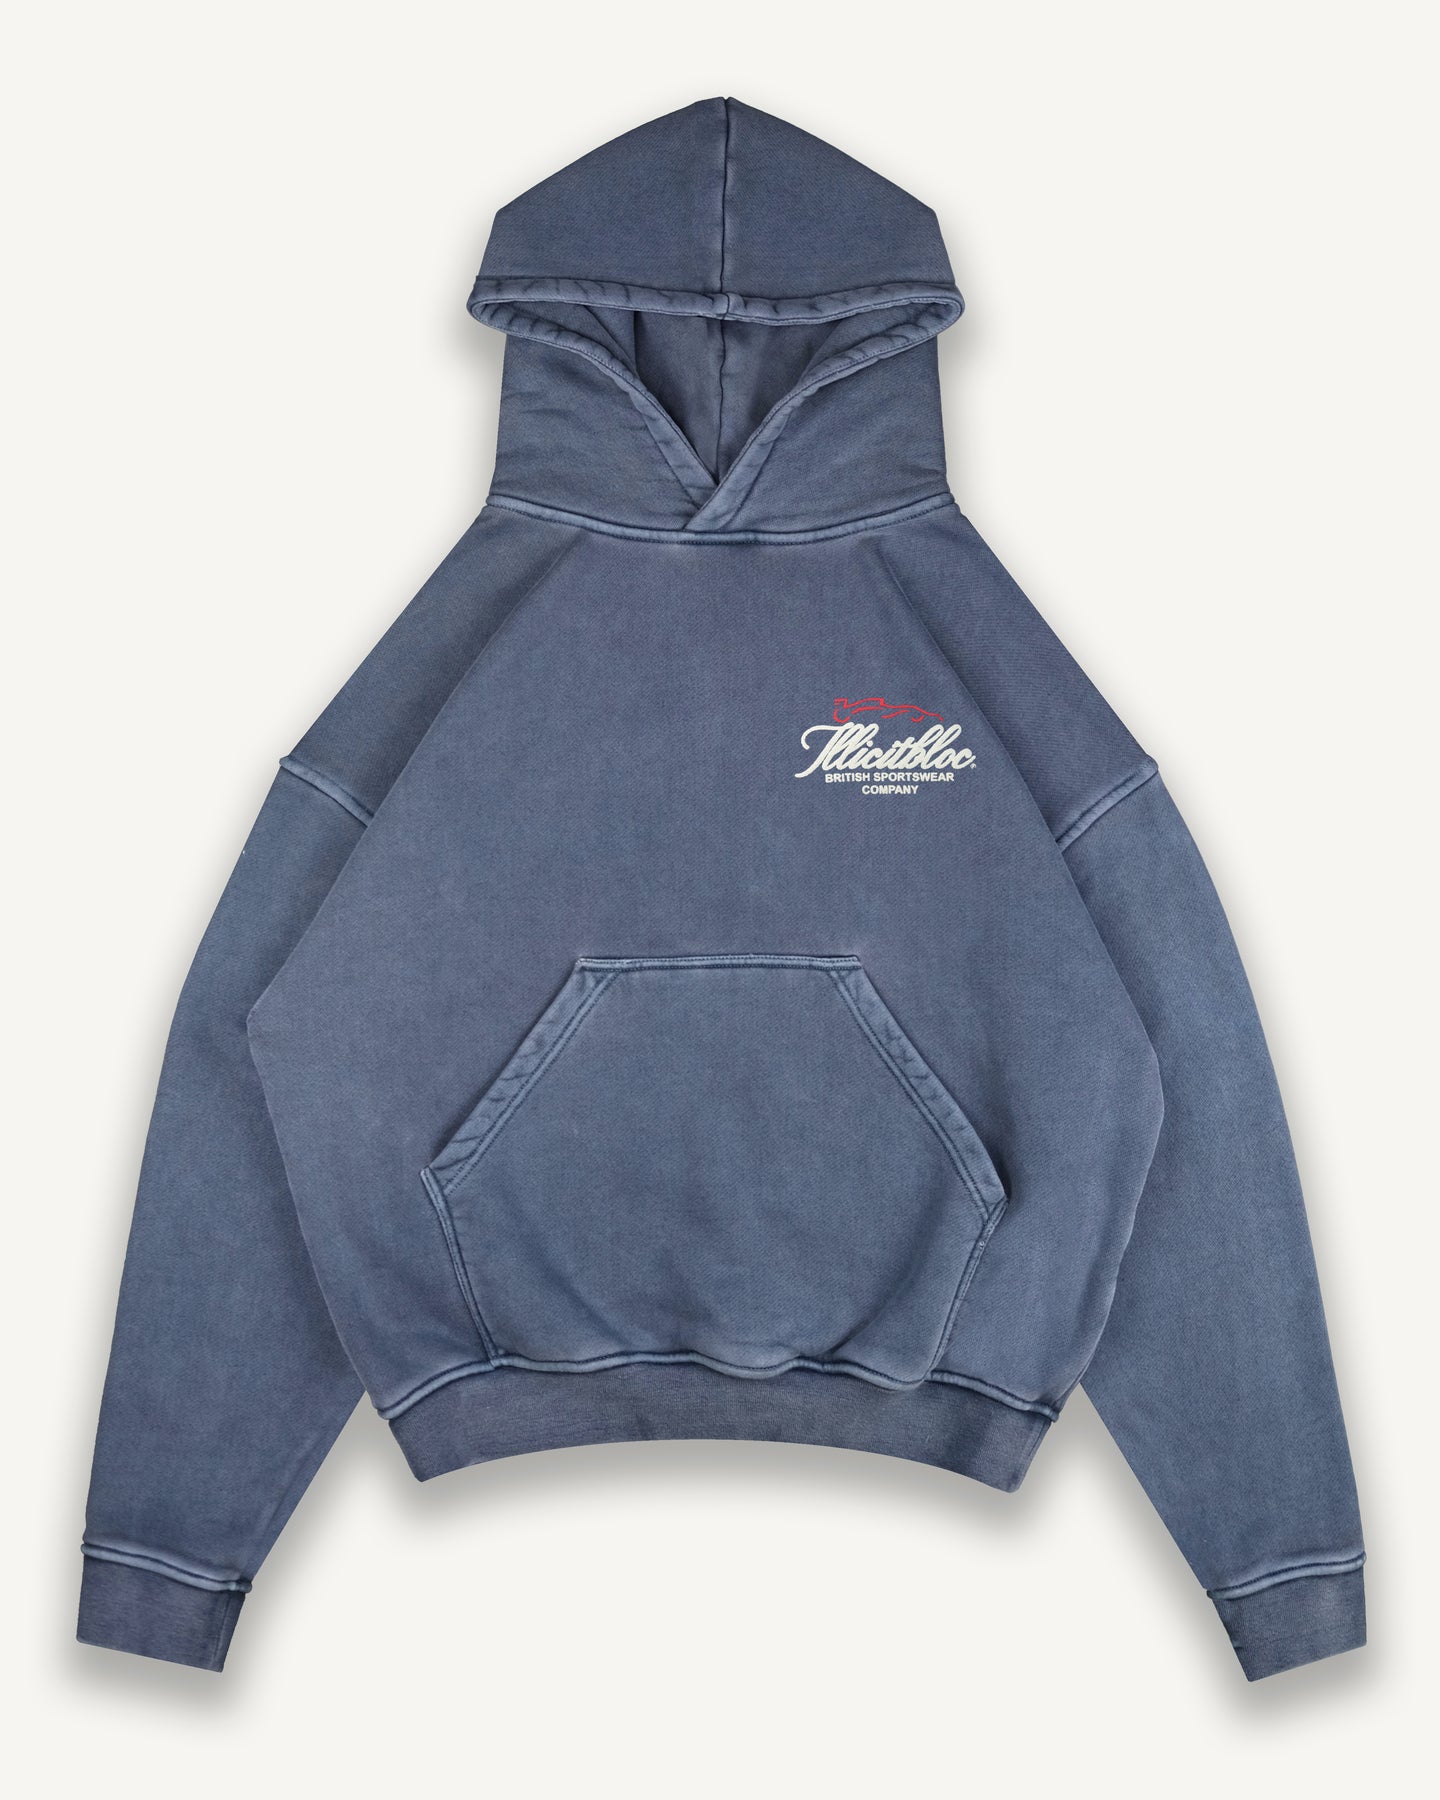 SILHOUETTE HOODIE - WASHED NAVY